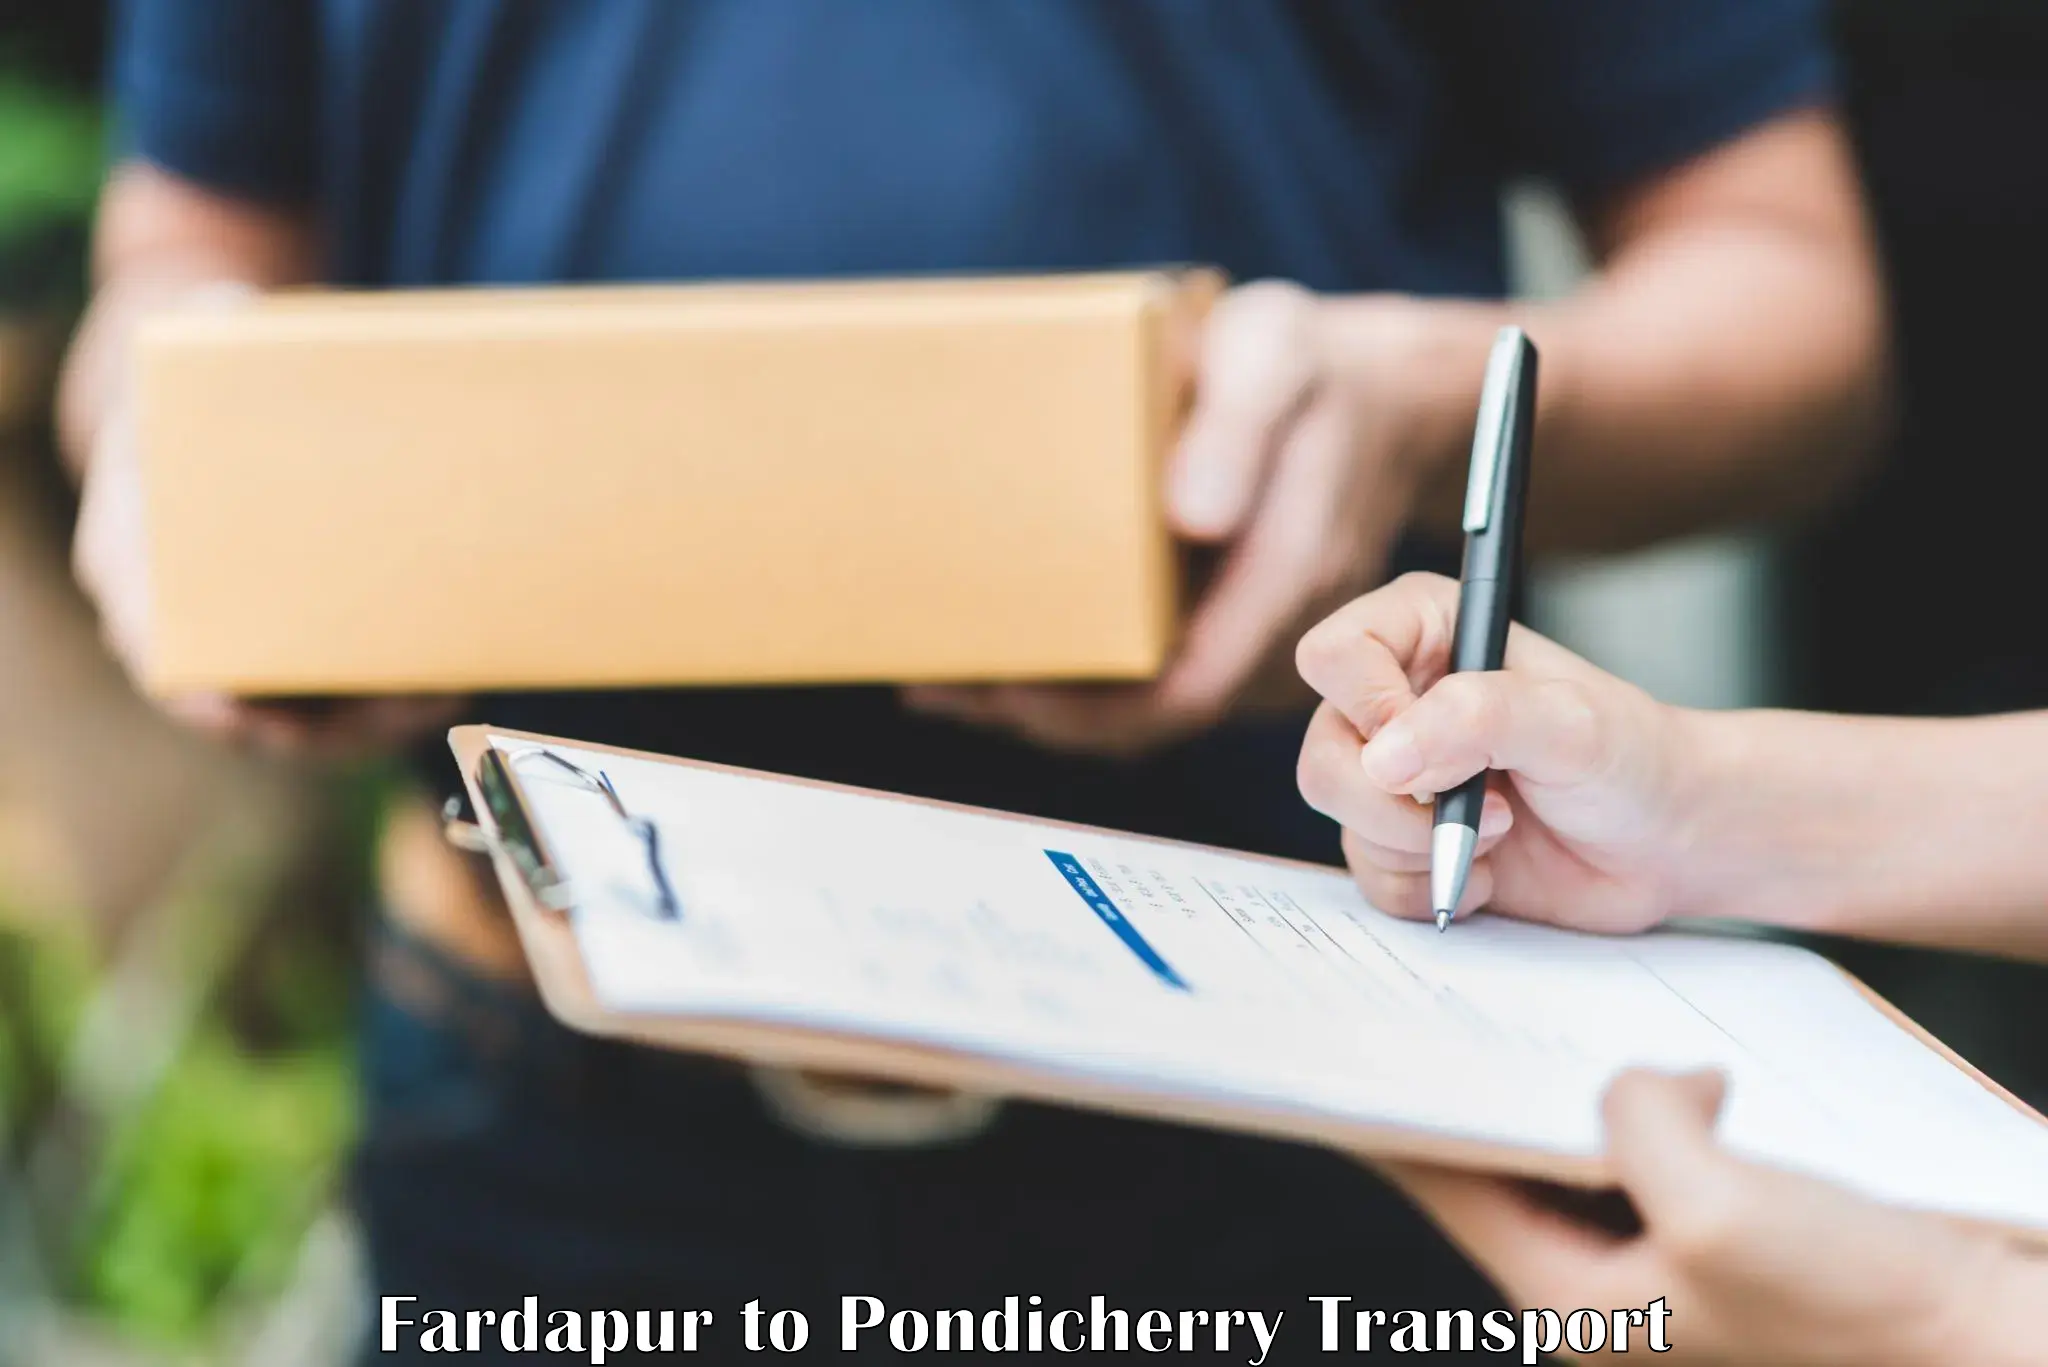 Commercial transport service Fardapur to Pondicherry